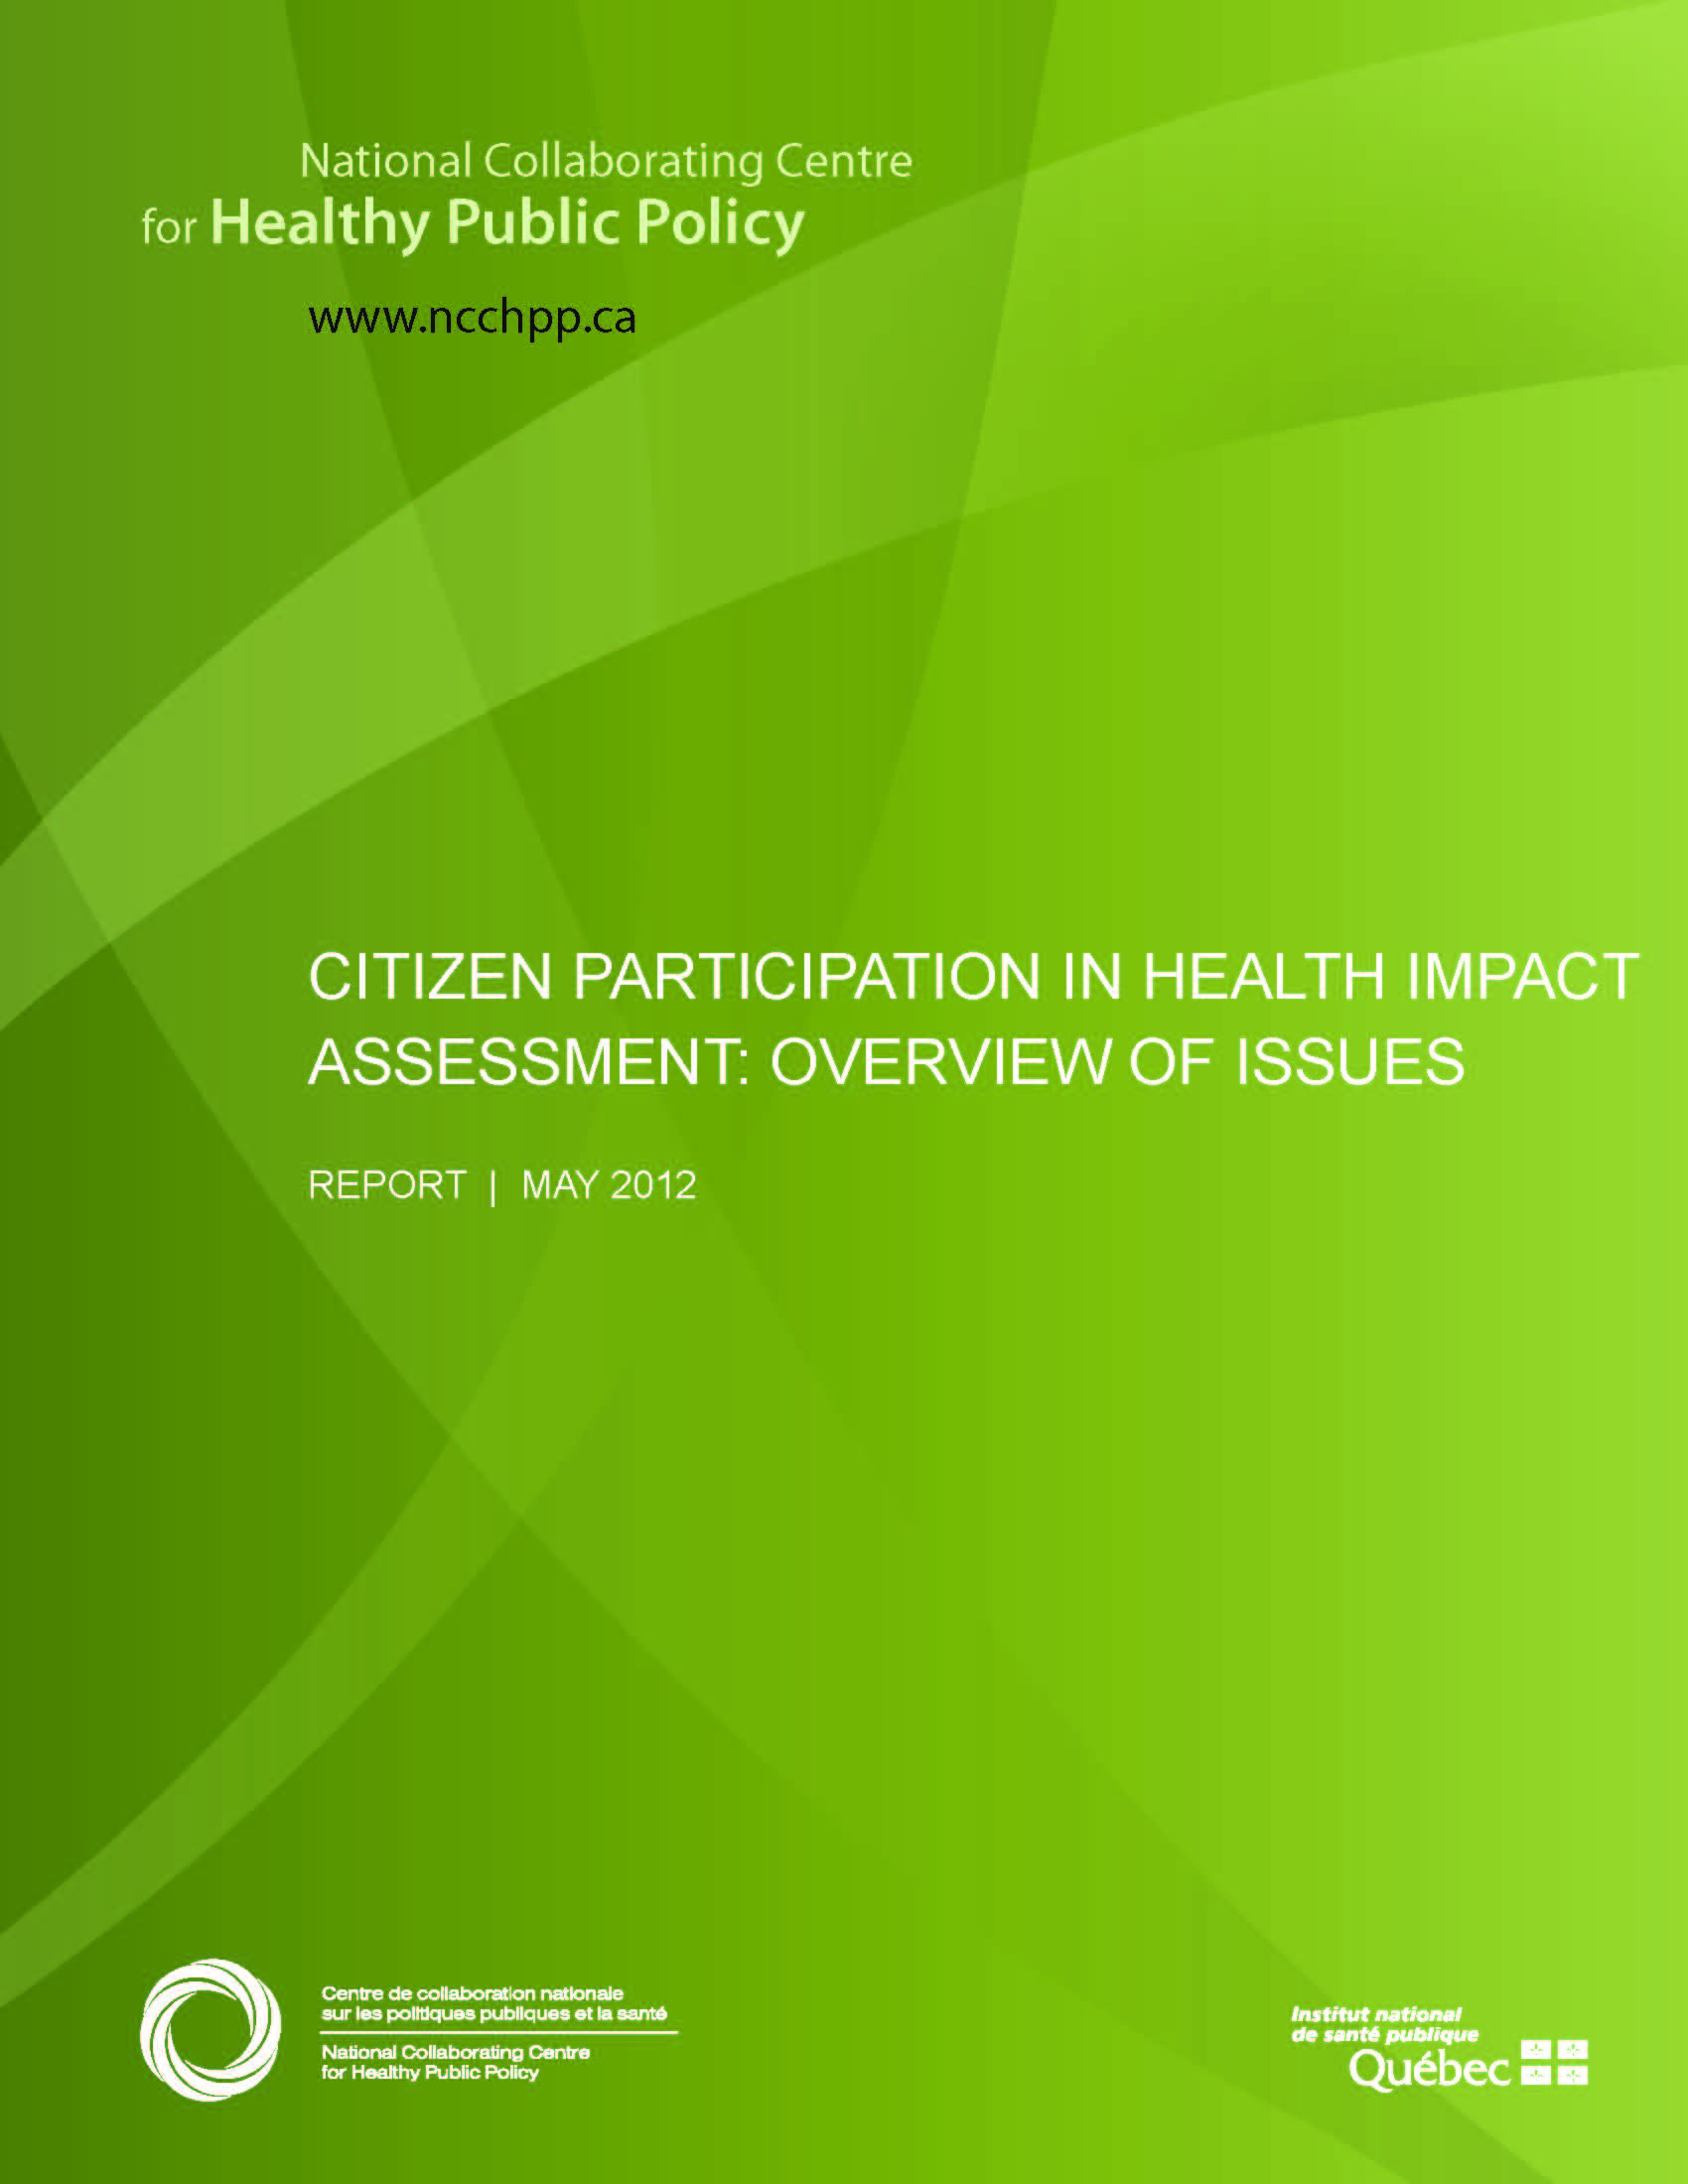 Citizen Participation in Health Impact Assessment: Overview of Issues